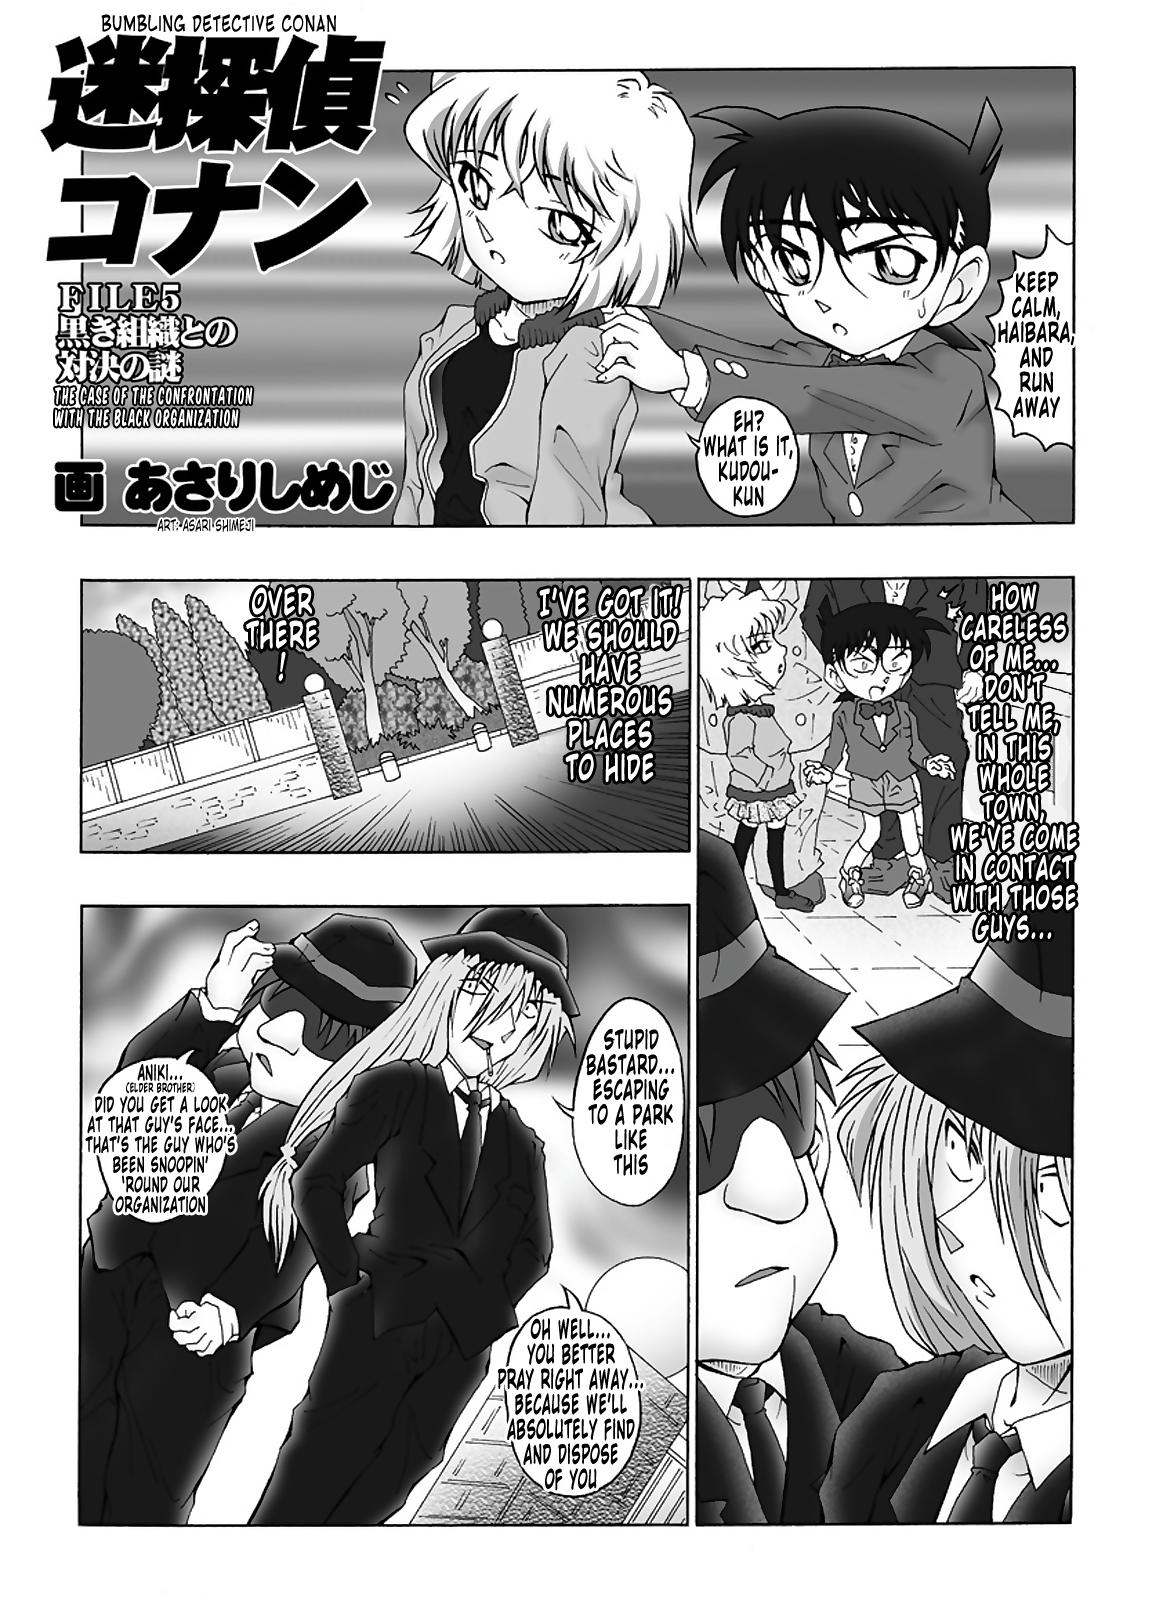 Porn Star Bumbling Detective Conan - File 5: The Case of The Confrontation with The Black Organiztion - Detective conan Trap - Page 4